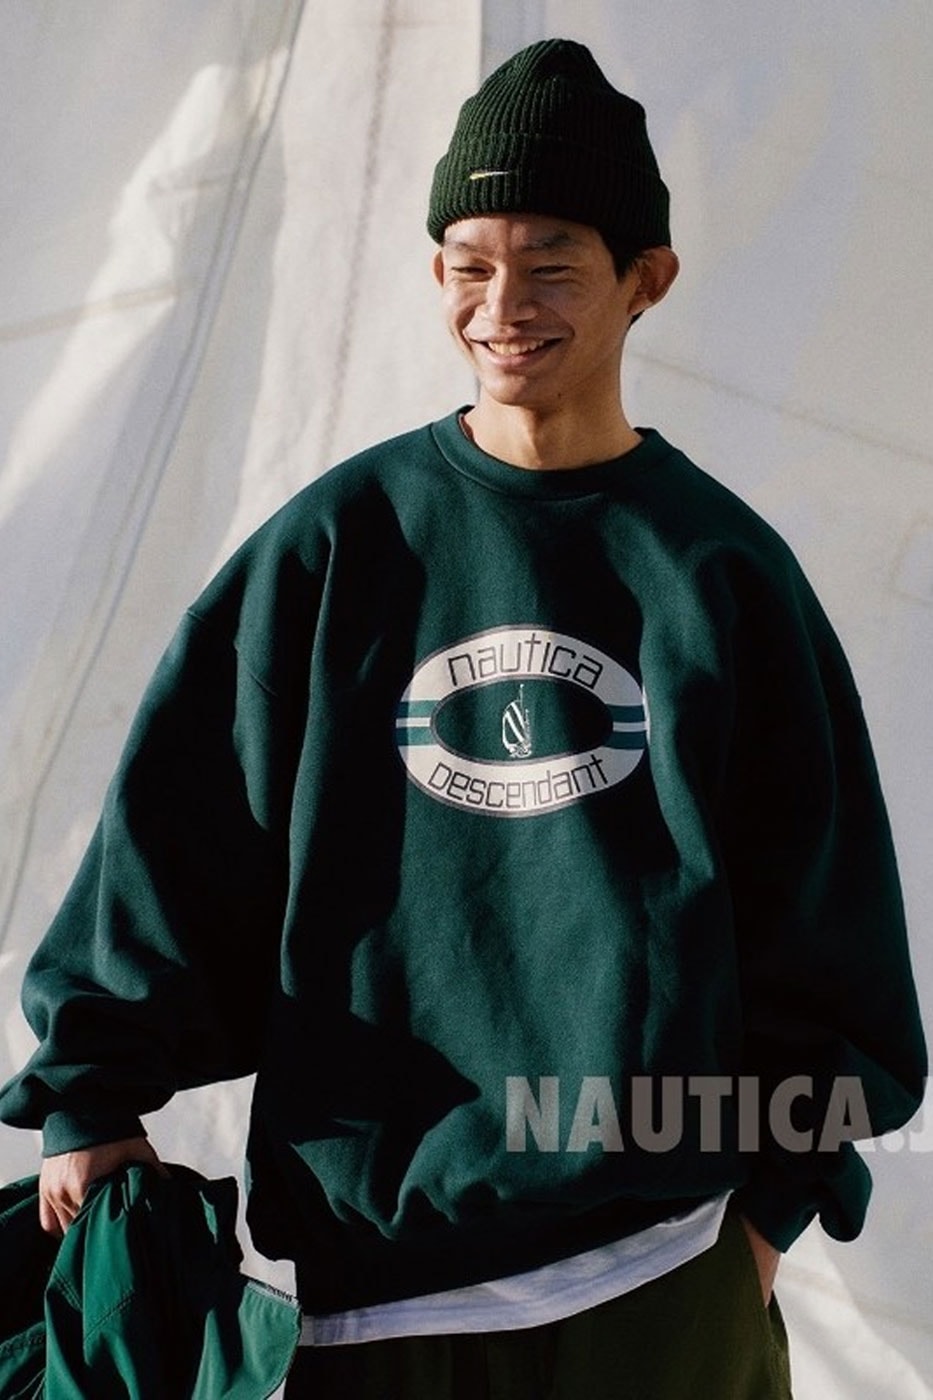 nautica white sail - the first nautica Japan concept store in